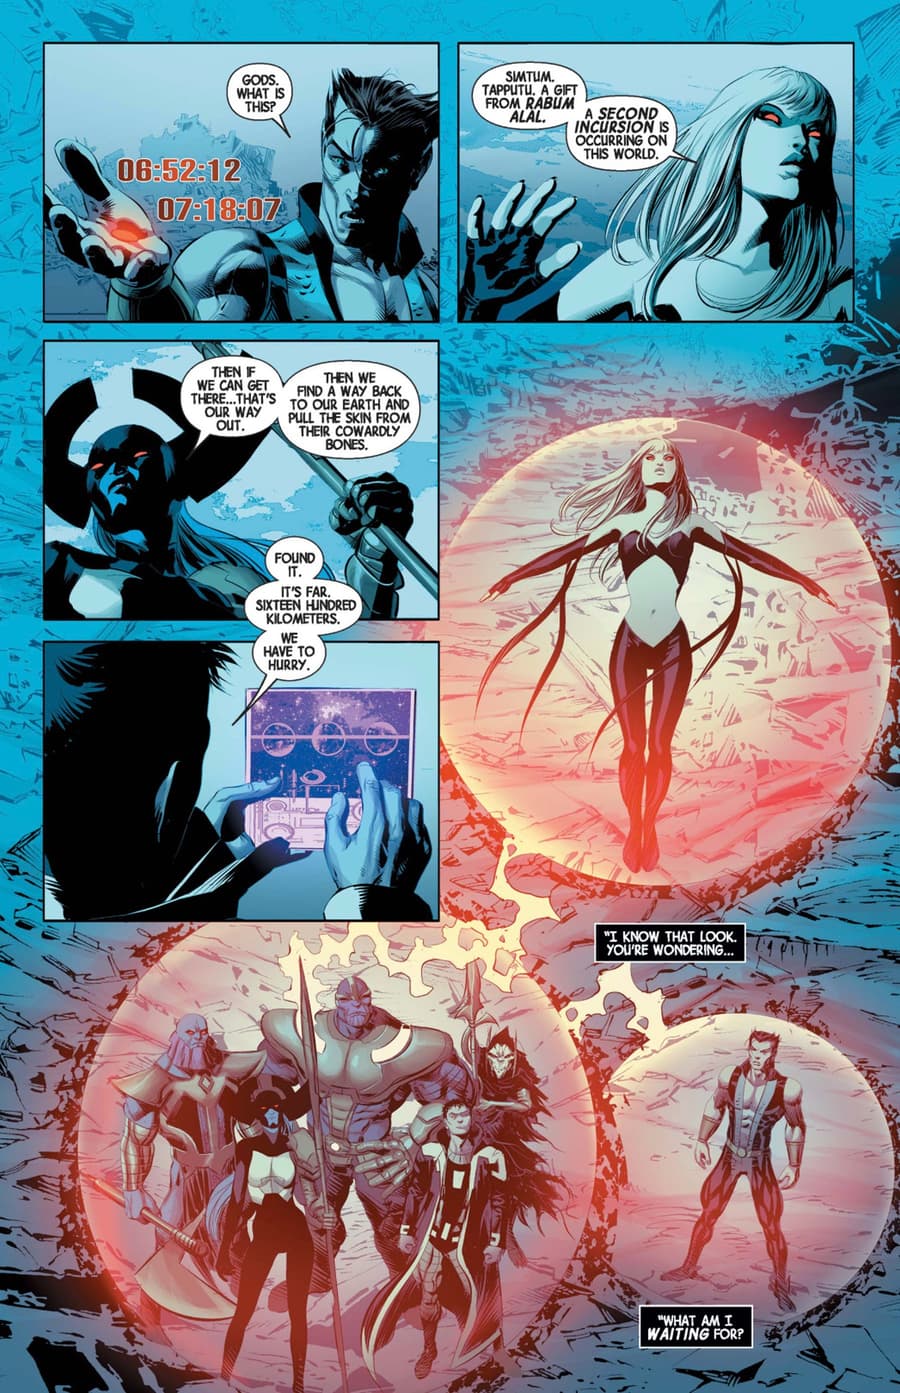 AVENGERS (2021) #41 page by Jonathan Hickman and Mike Deodato